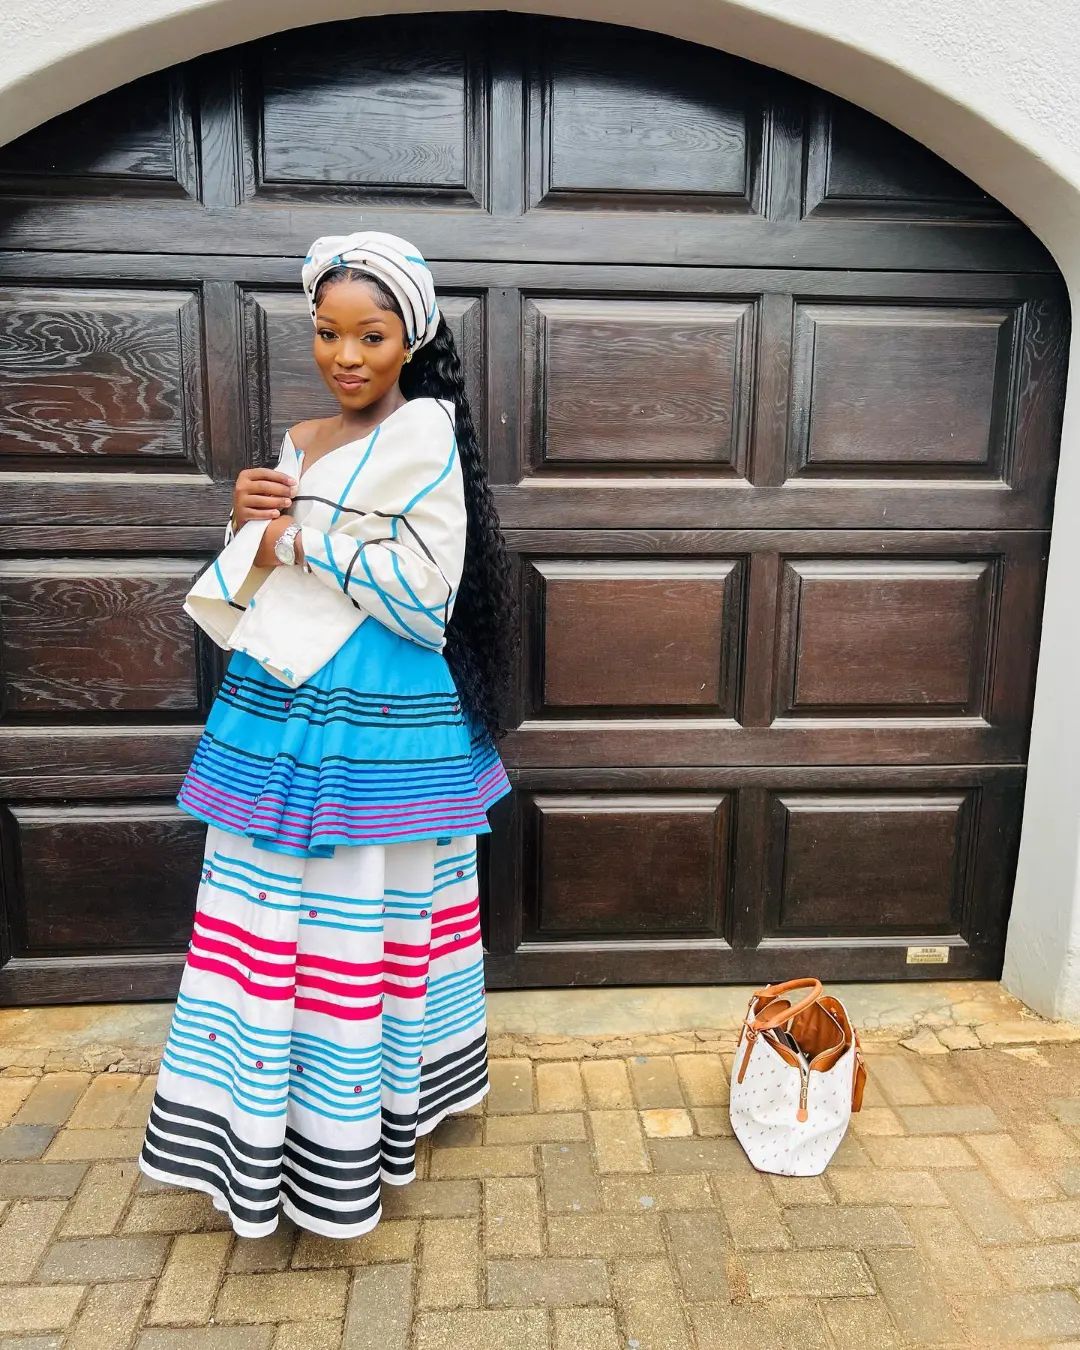 Xhosa Traditional Attire Takes Center Stage at Annual Fashion Show 28